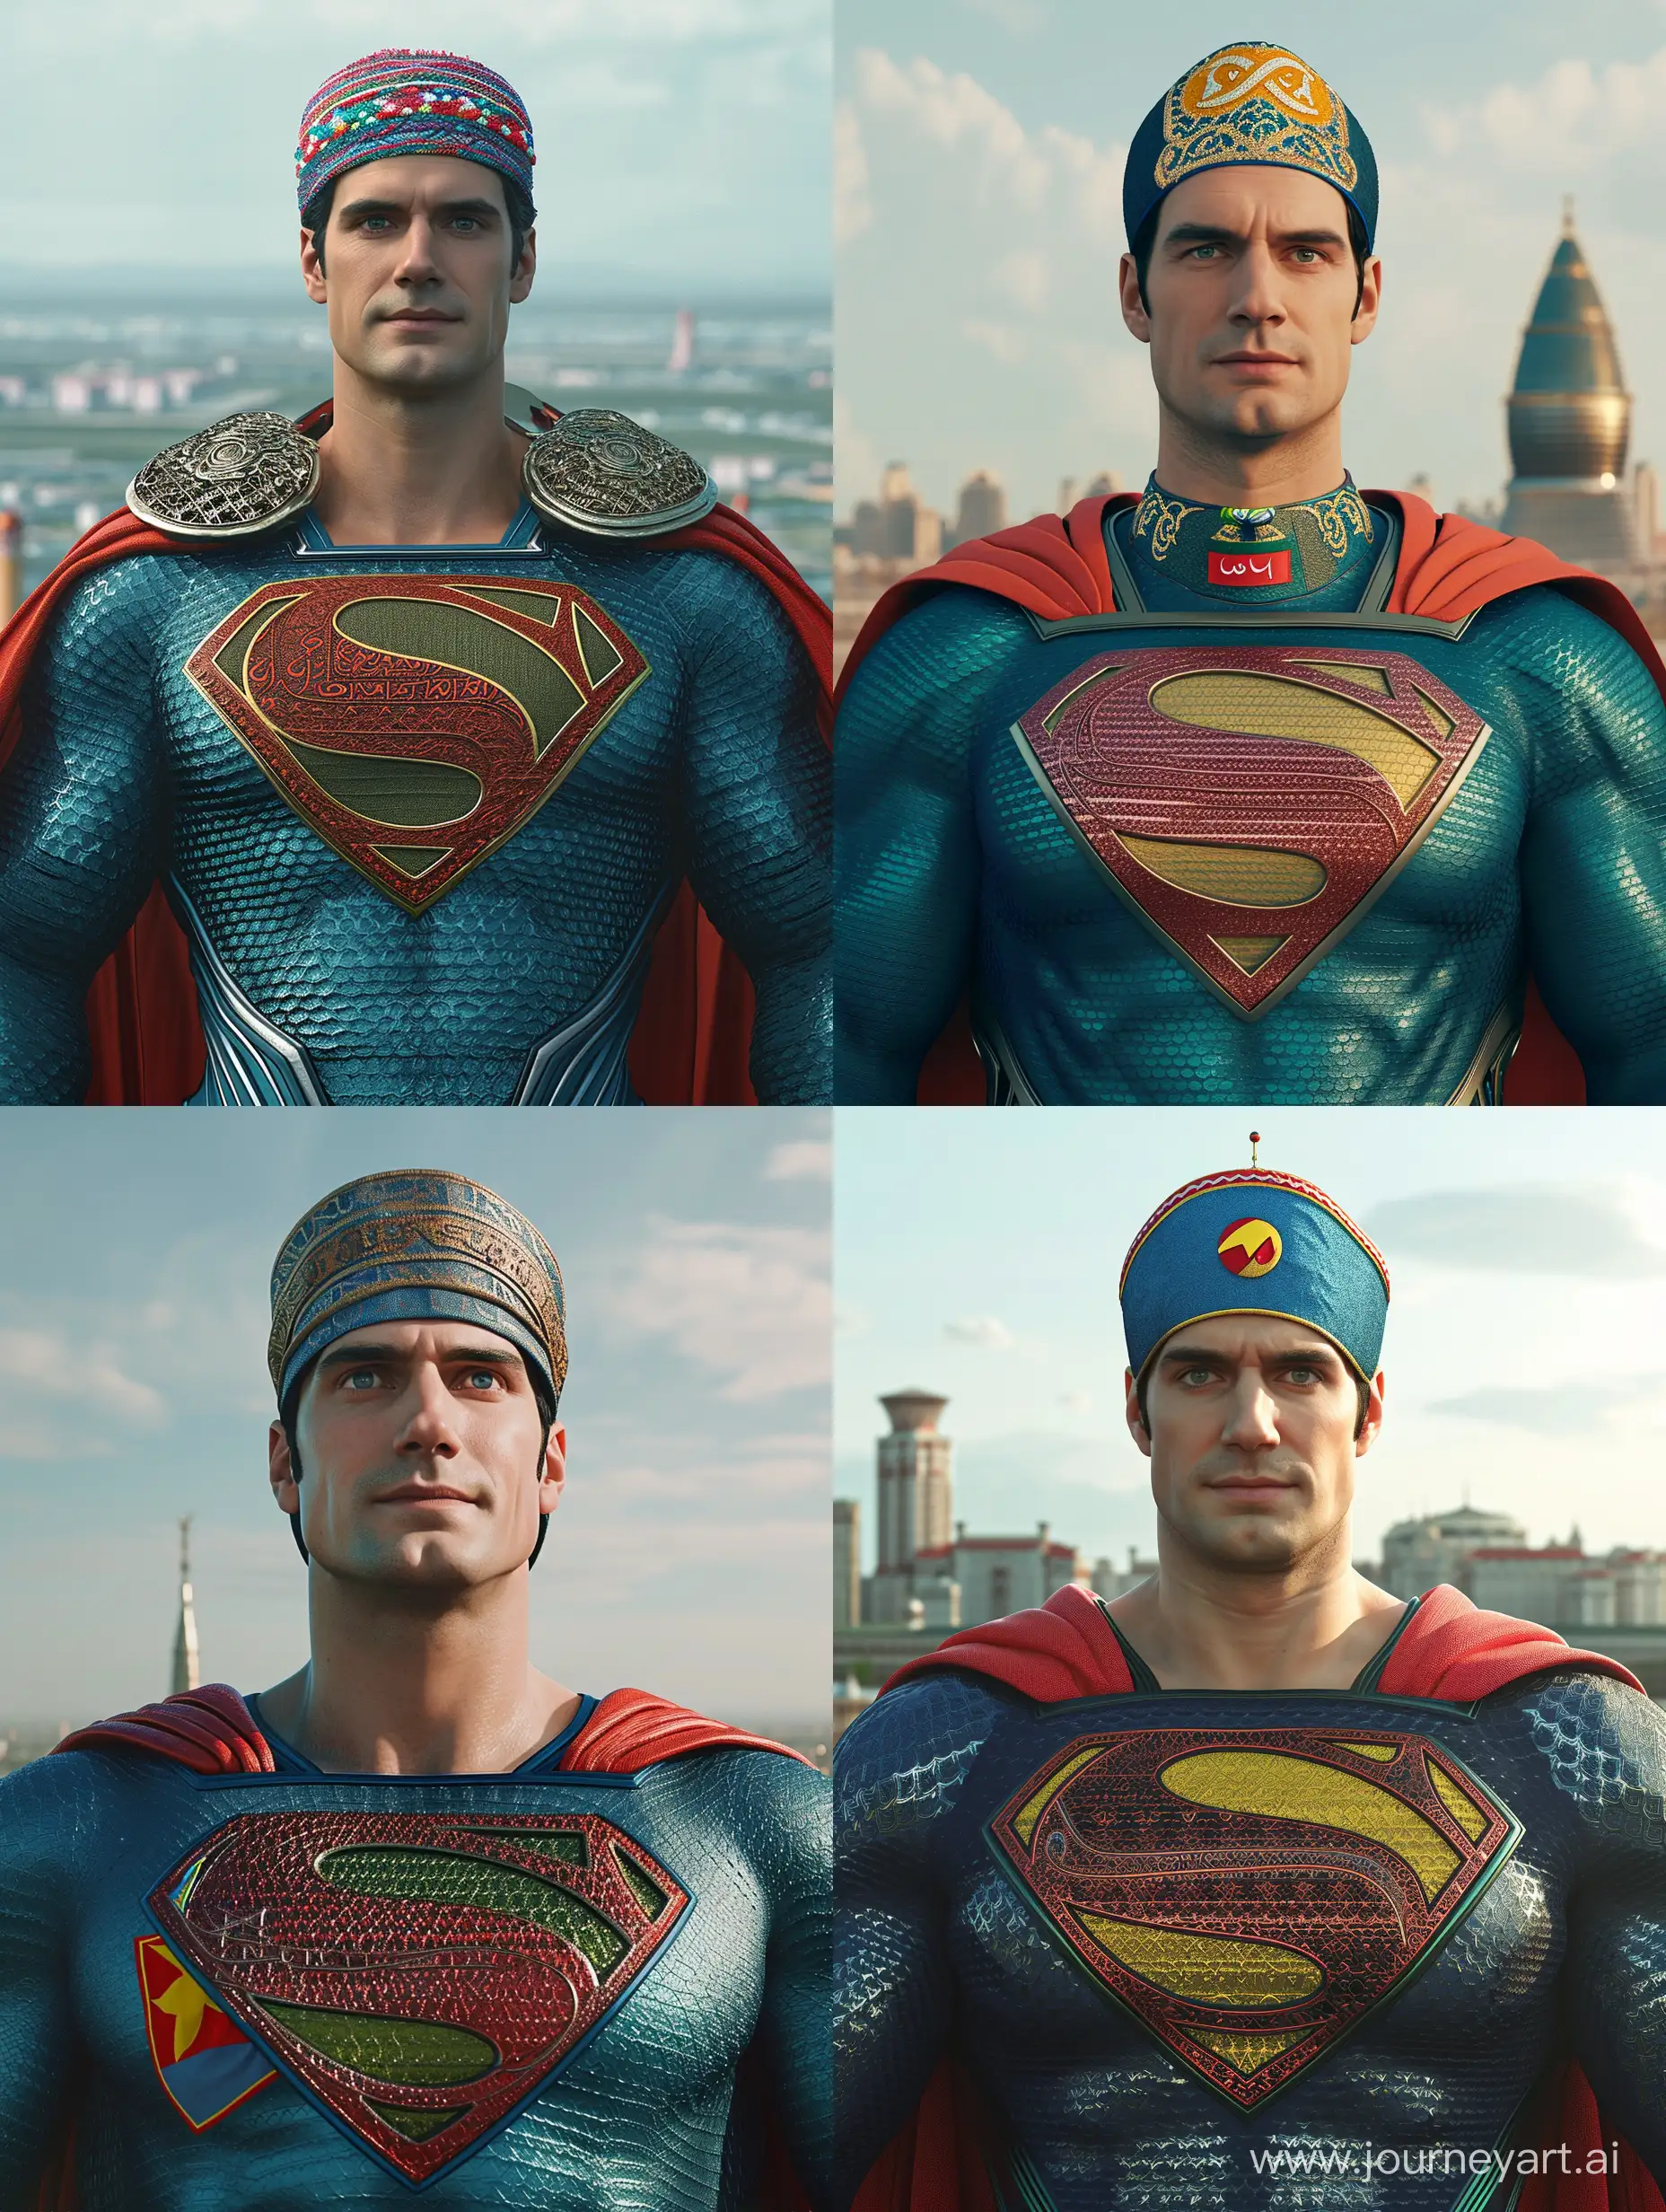 Henry Cavill superman, he in Kazakhstan traditional attire, muslim skullcap on the head, On the chest is a logo of the Kazakhstan flag, Almaty Kazakhstan behind him, far view from front, shot from the movie, cinematic, photorealistic, ultra-detailed, 4k